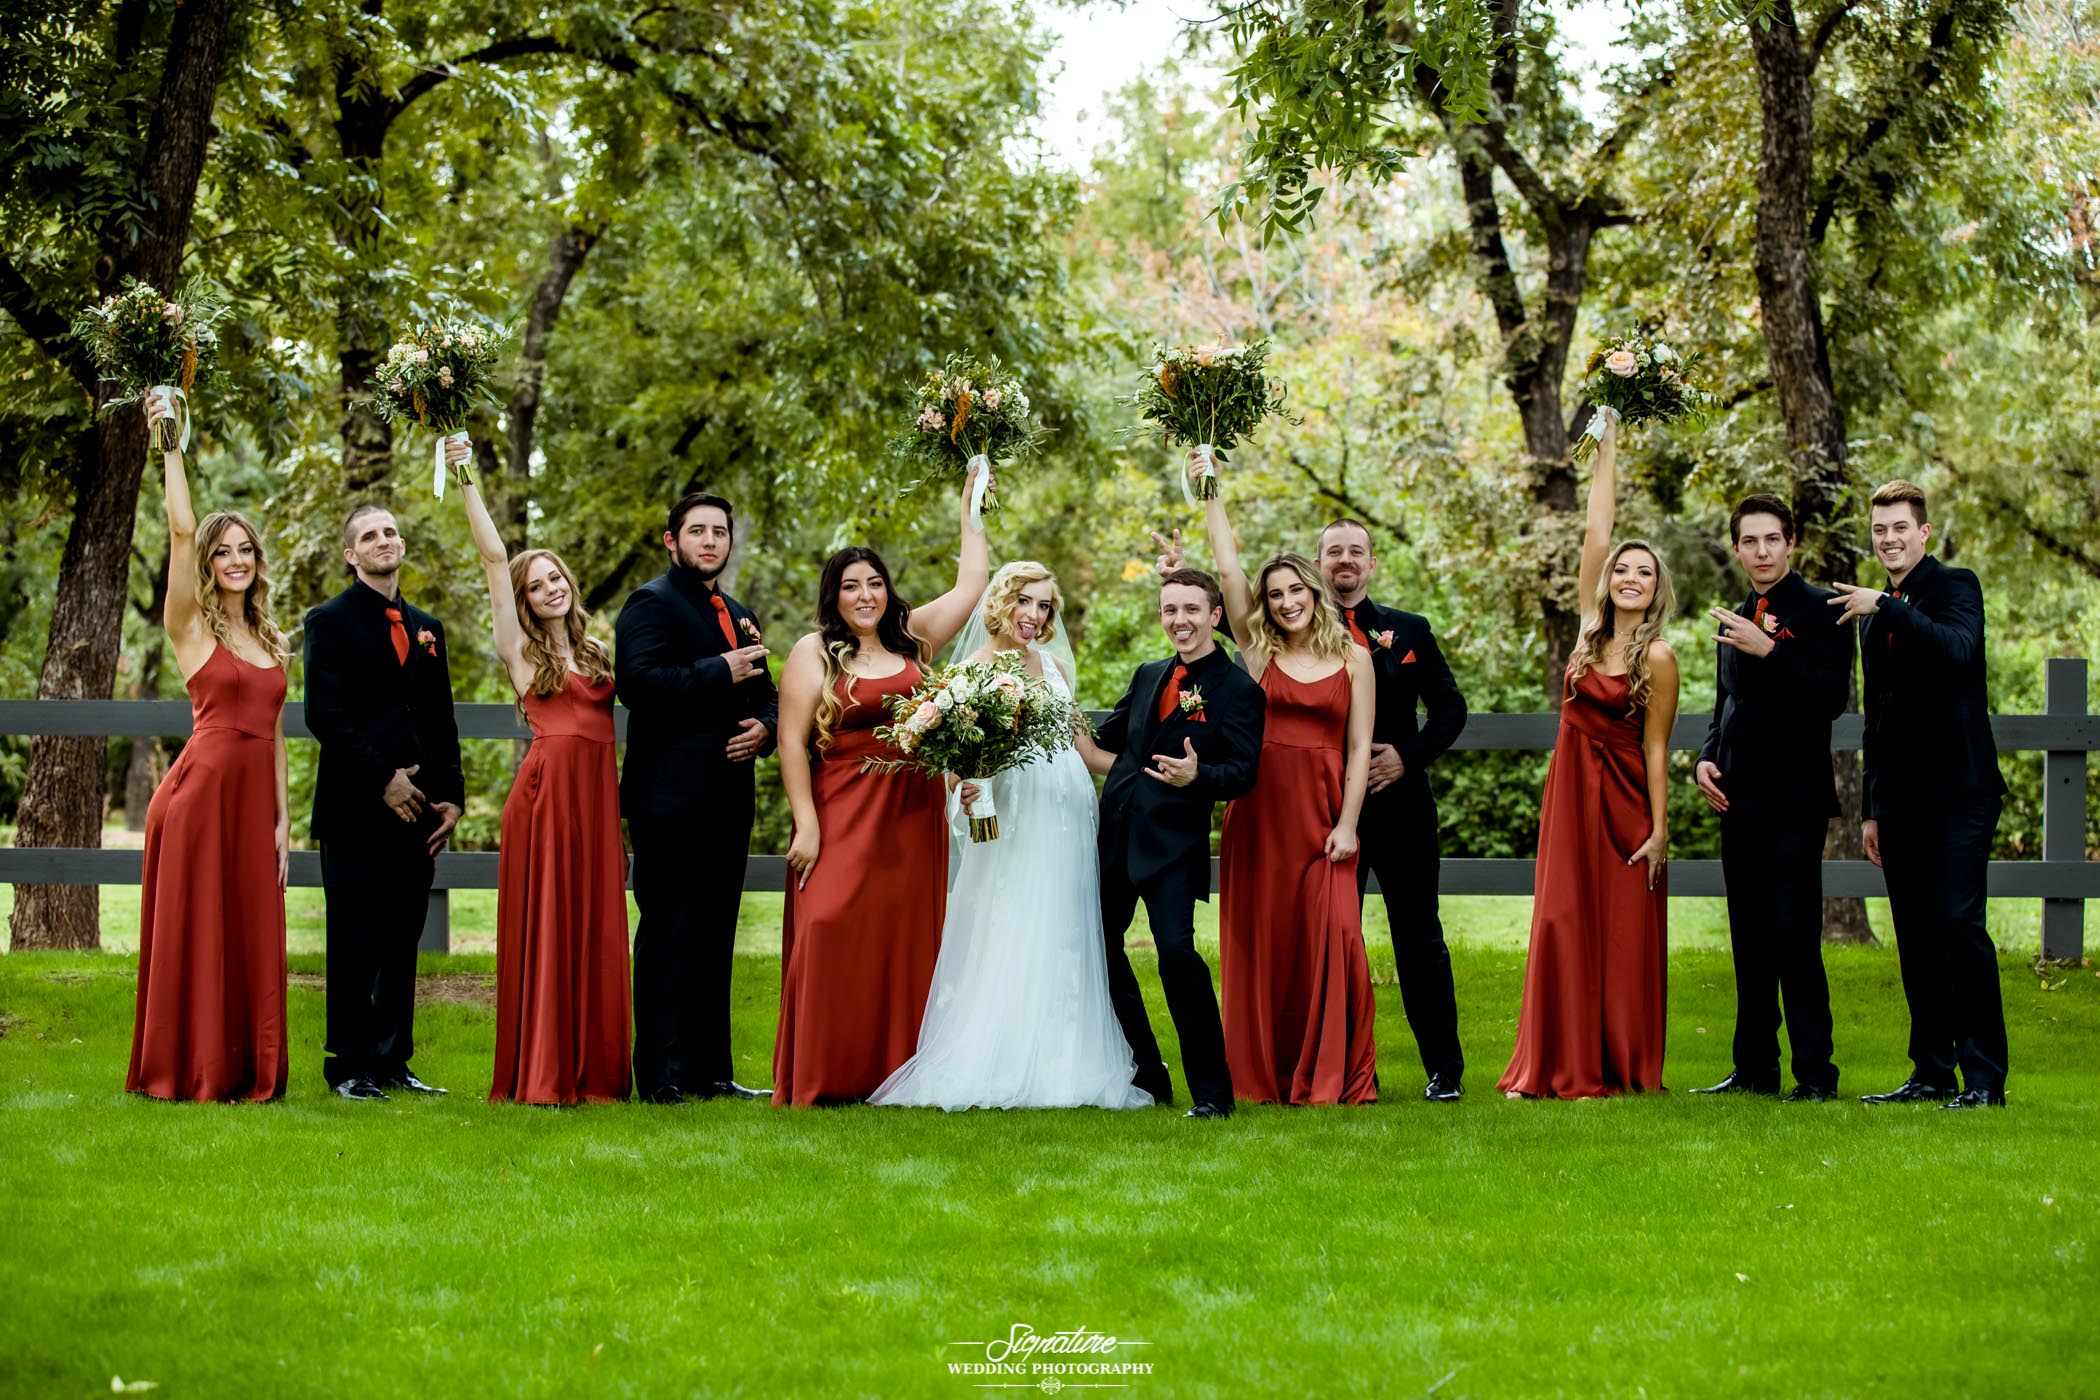 Fun pose of wedding party outside